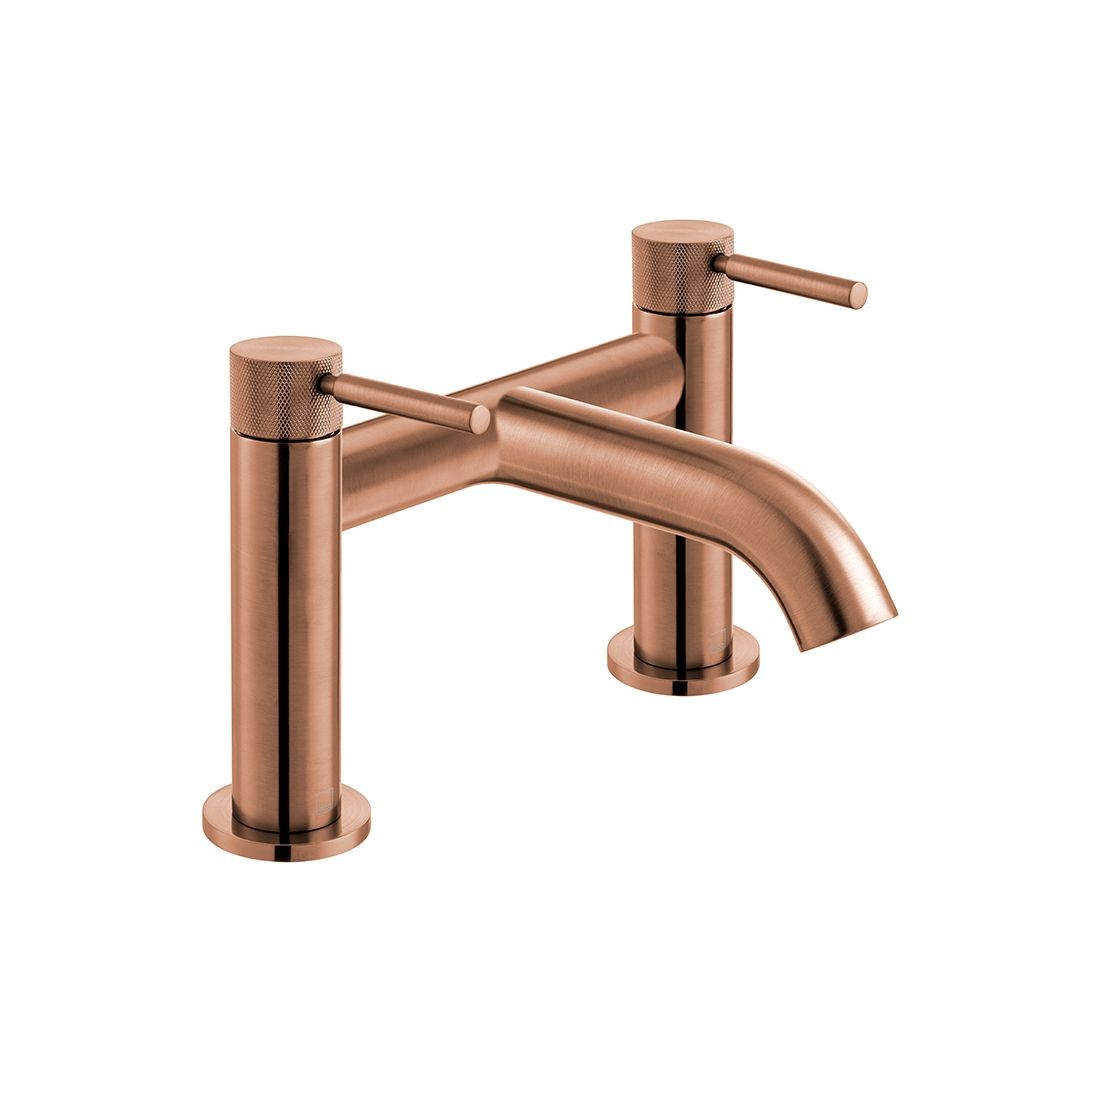 Individual by Vado Origins Deck Mounted Bridge Bath Filler Tap with Knurled Accents Brushed Bronze [IND-ORI237-BRZK]